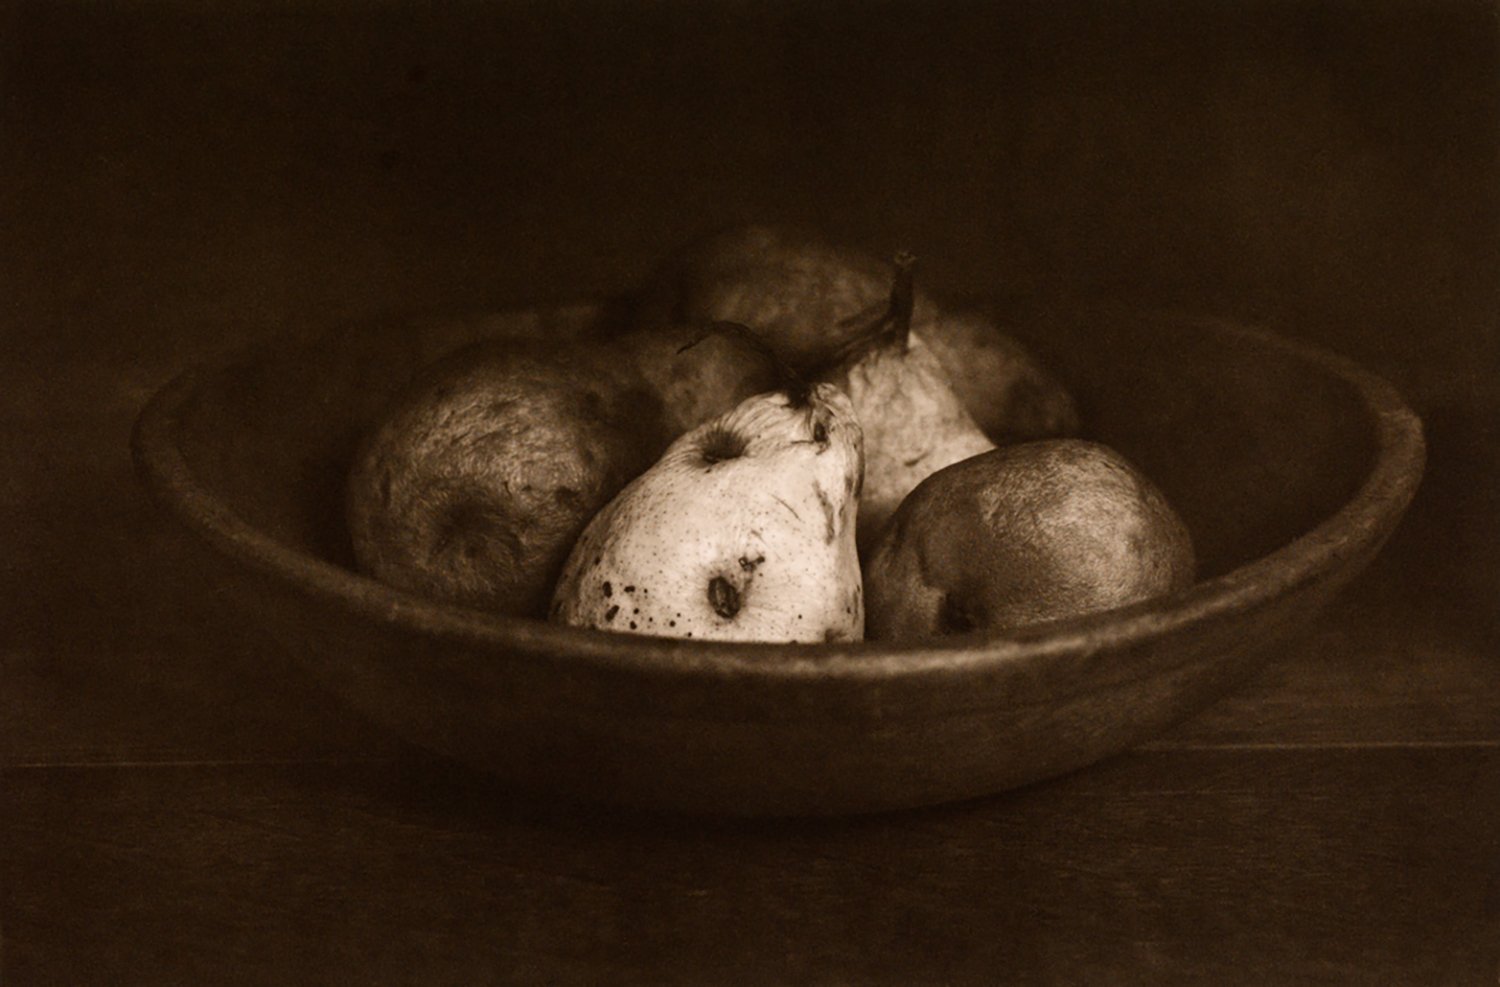 "Hetta’s Bowl with Pears" - Photopolymer Gravure (Double Exposure Method with Aquatint Screen)